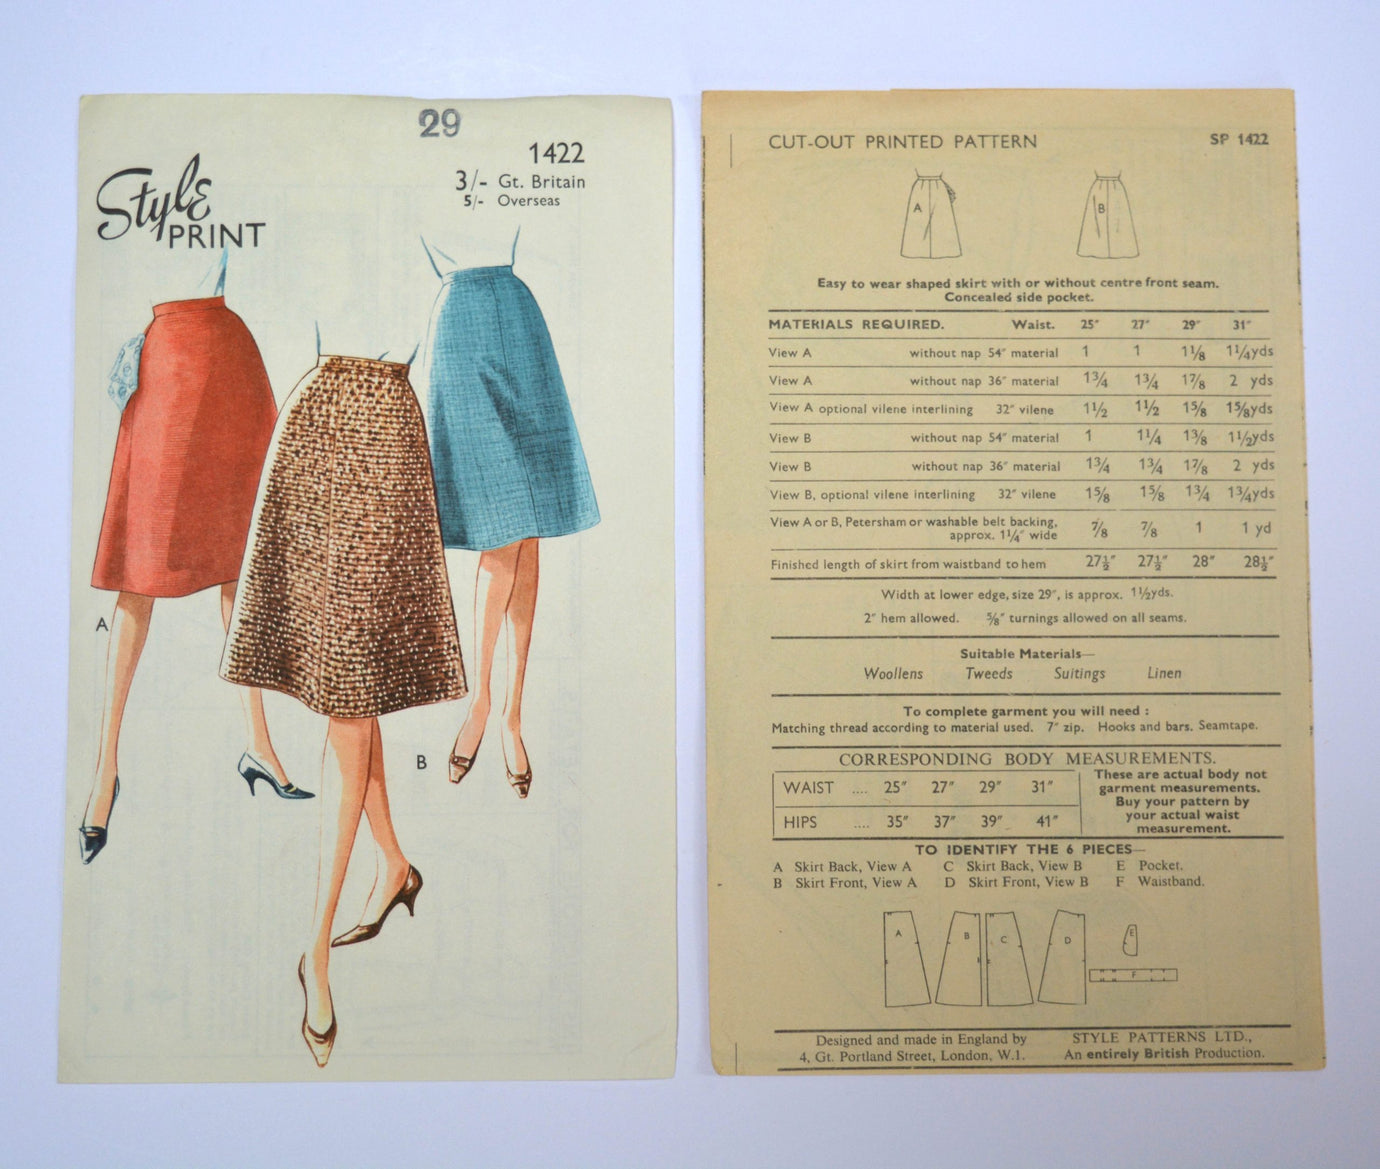 THE SEWING PATTERN TUTORIALS: 5. SEWING WITH VINTAGE PATTERNS